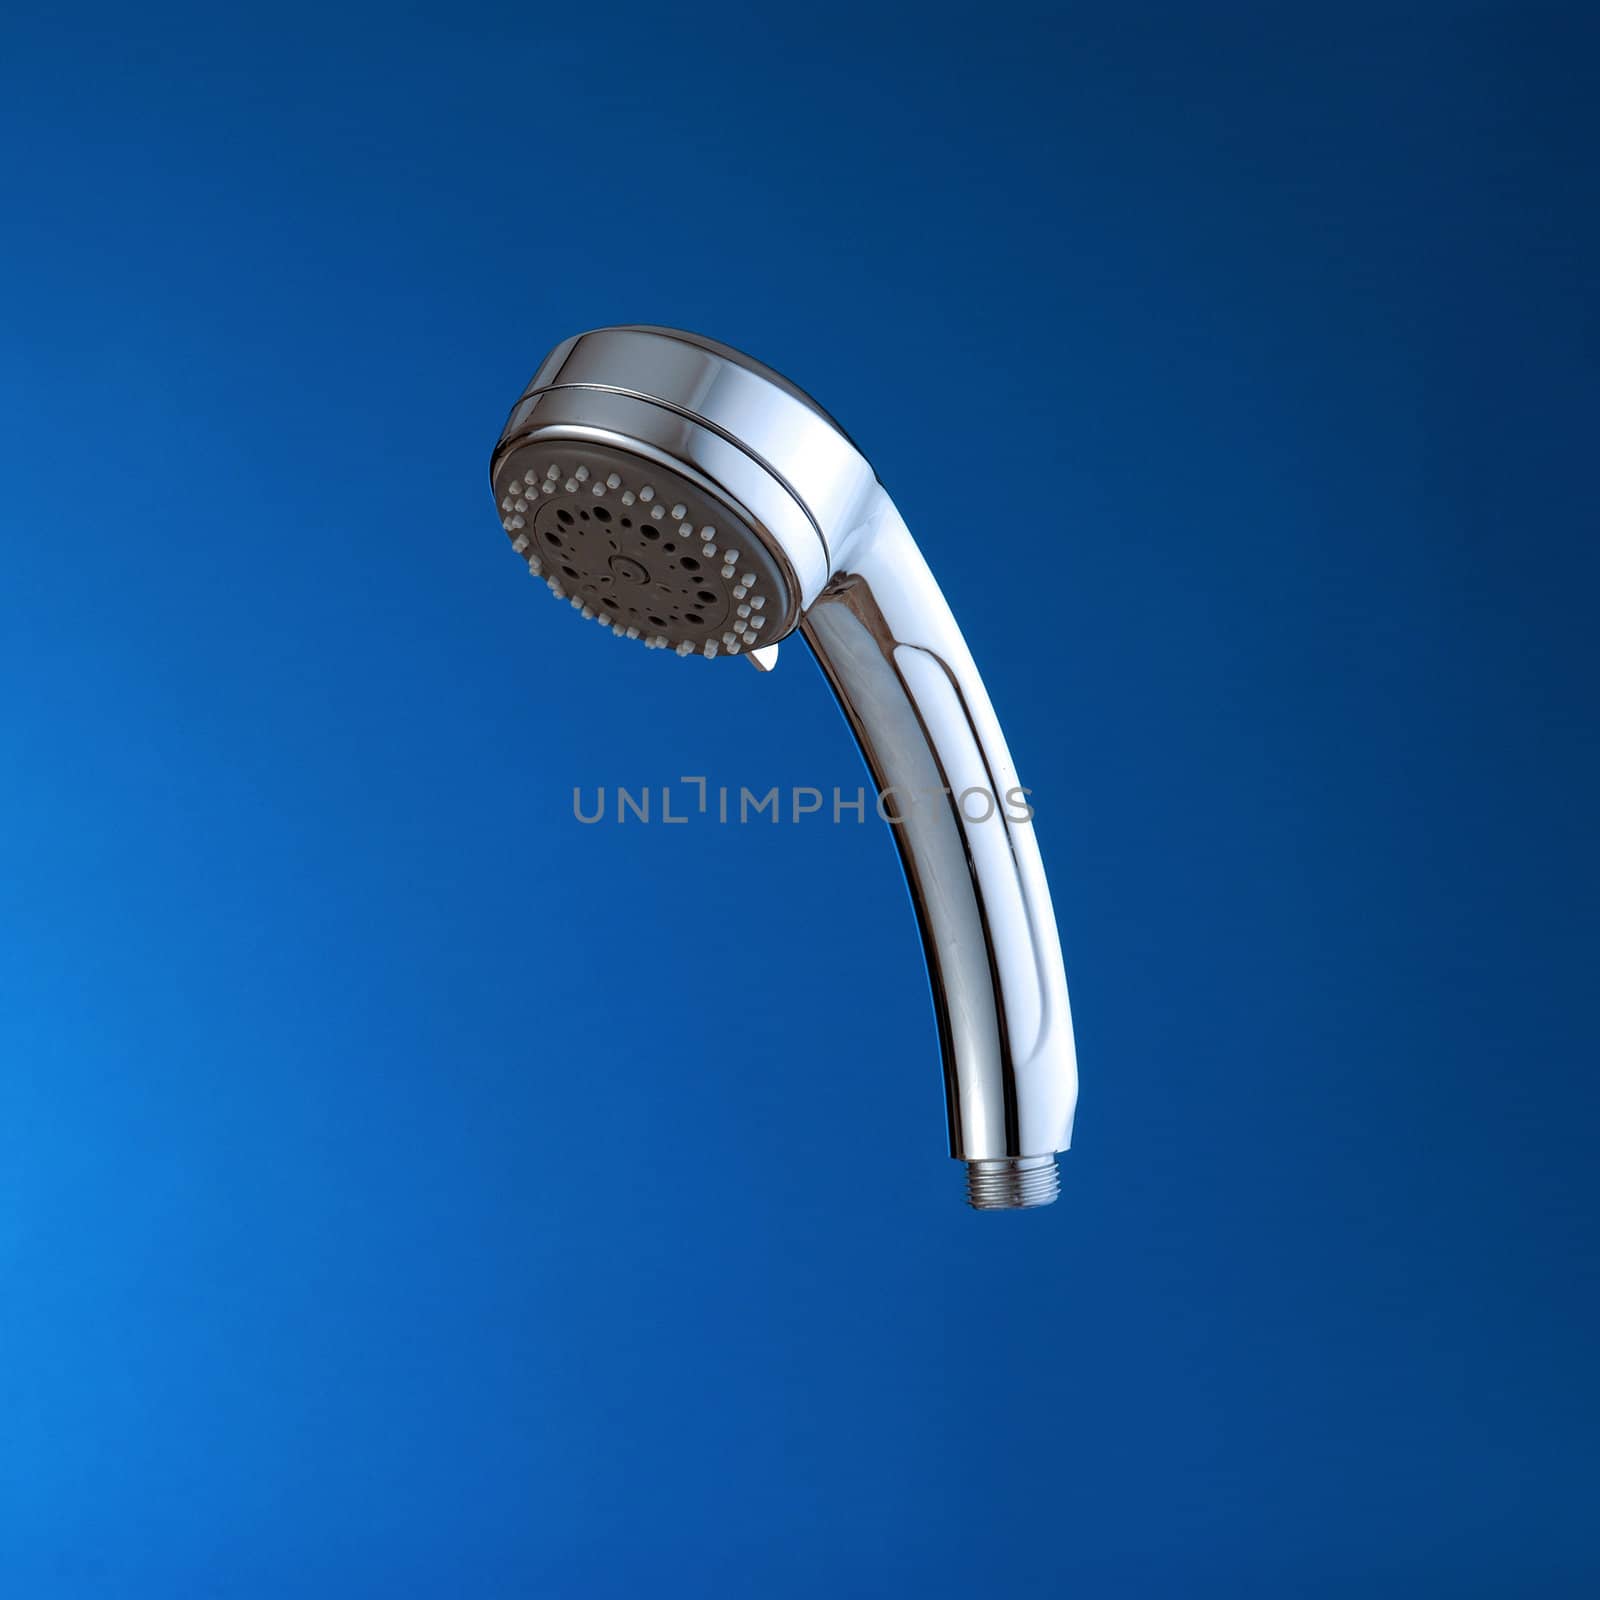 Shower head close-up, on blue background